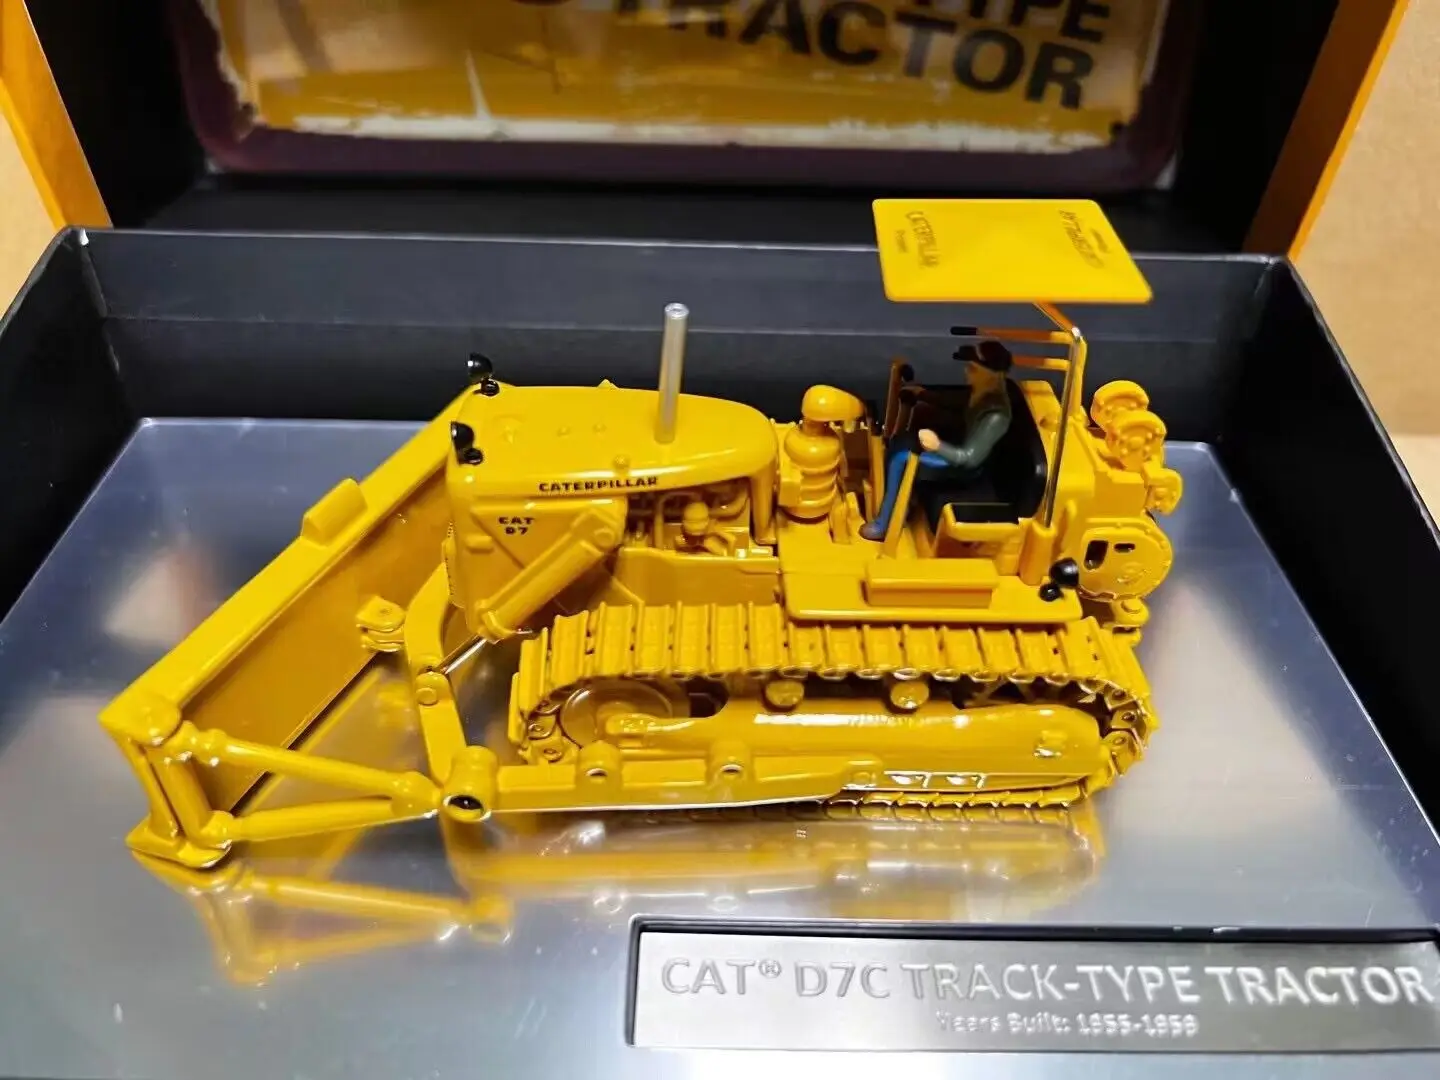 Cat D7C Track-Type Tractor 1955-1959 1/50 Scale Metal Model By DieCast Masters DM85577 New in Box